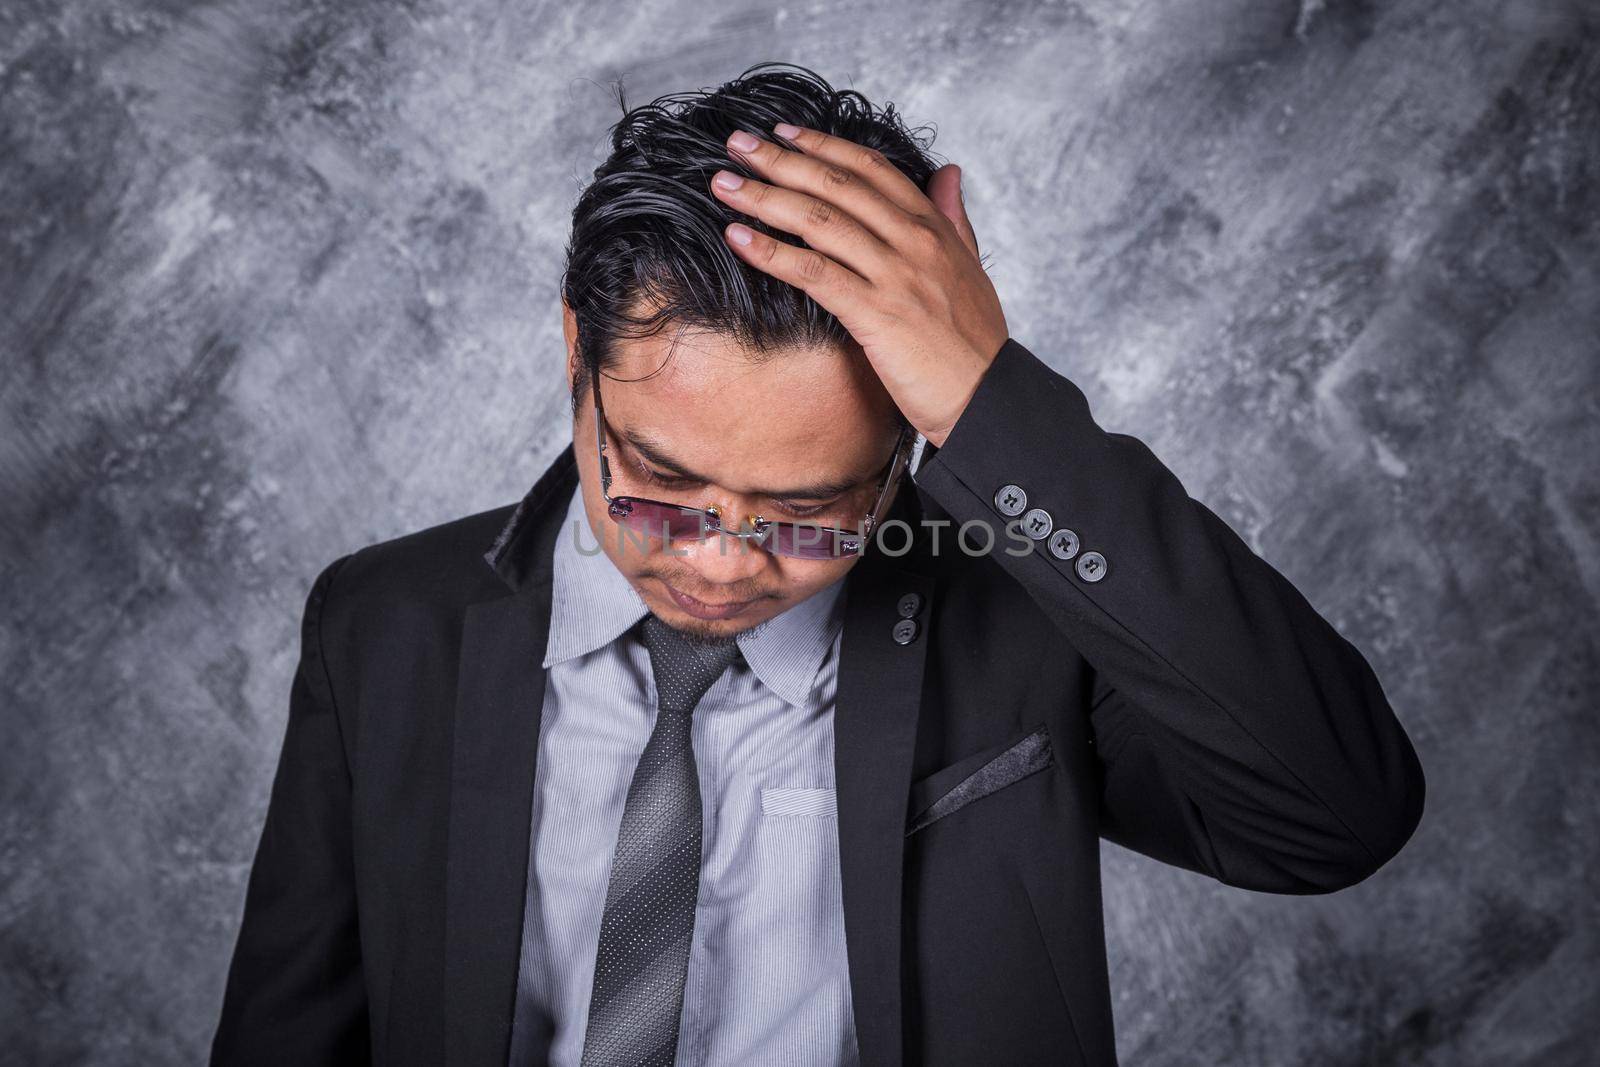 young business man in suit with headache and problems